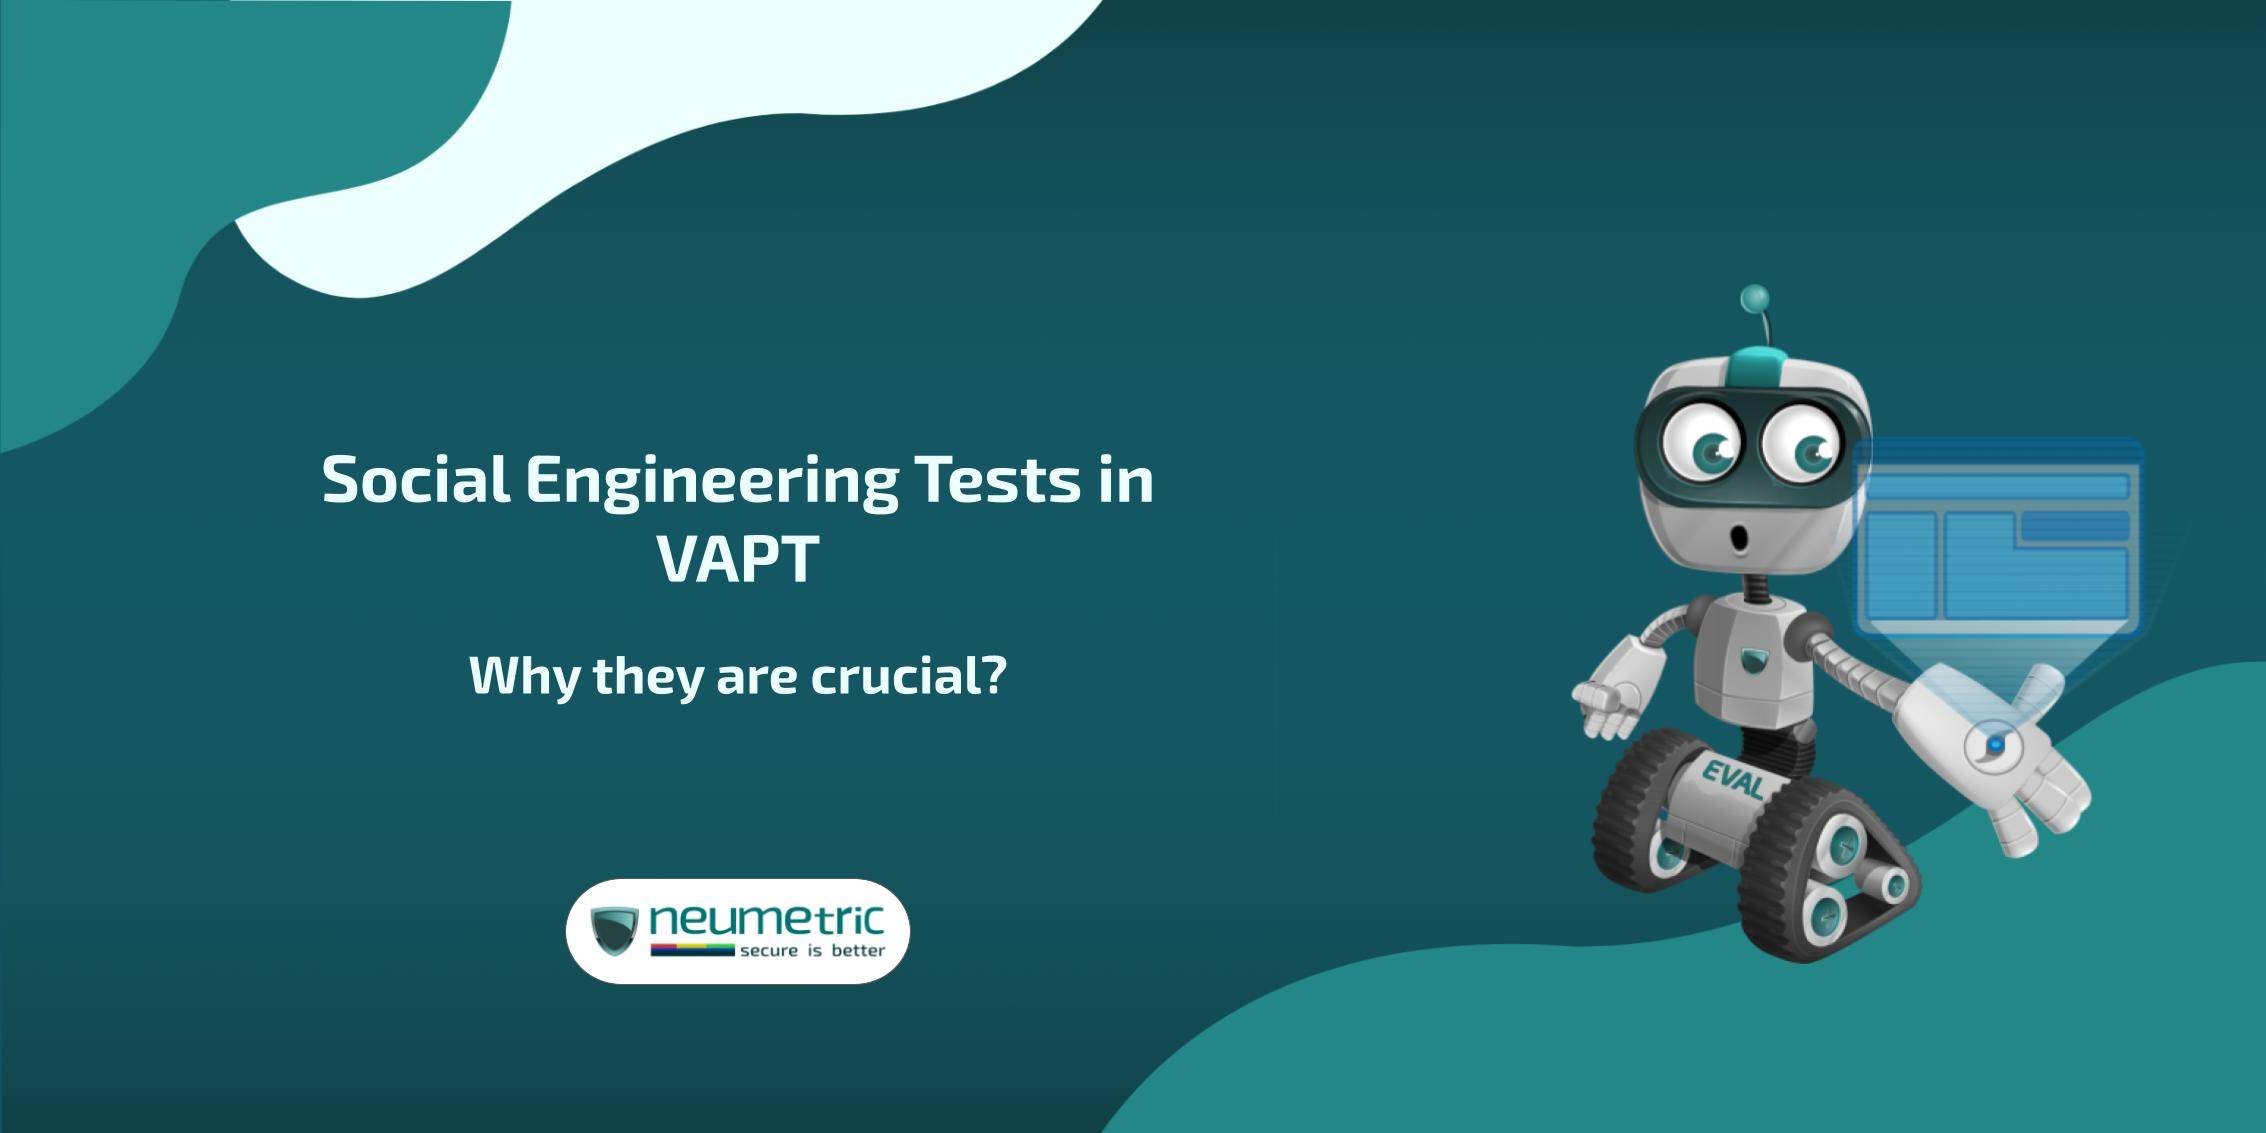 Social engineering tests in VAPT: Why are they crucial?